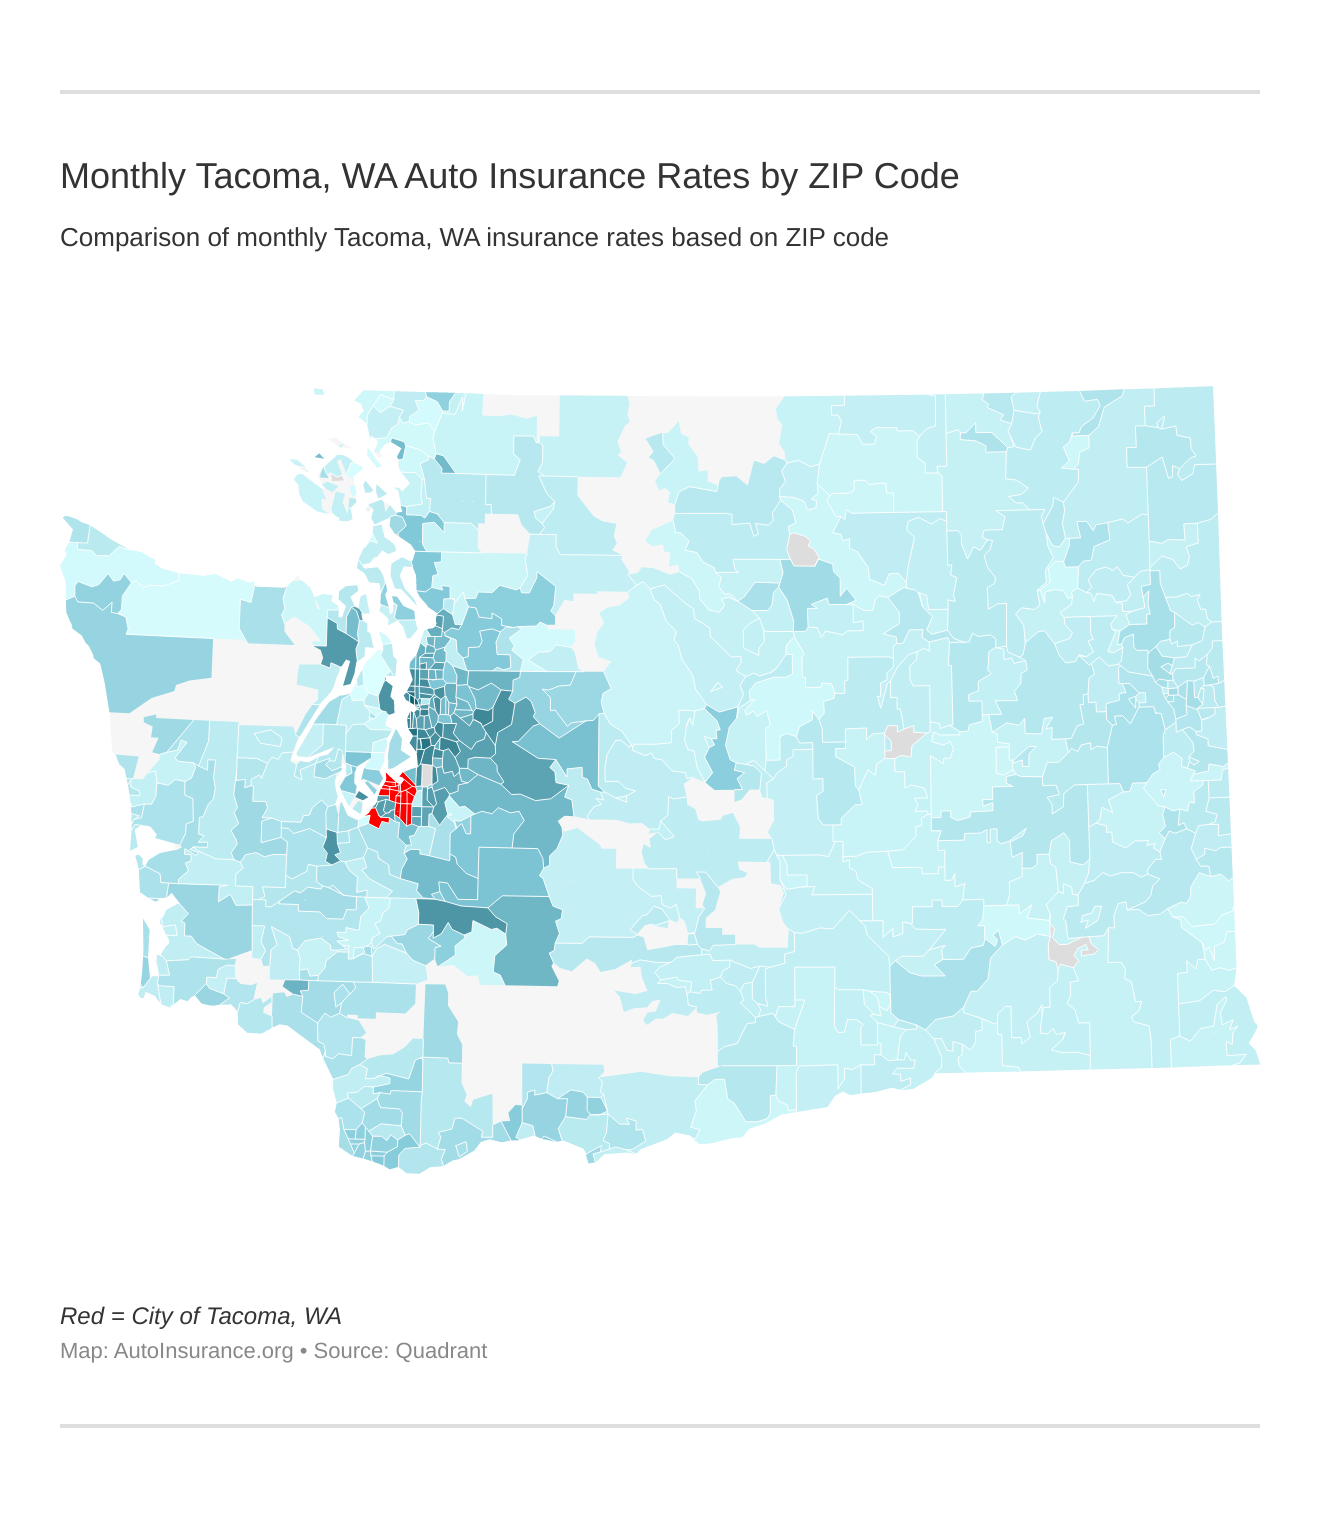 Monthly Tacoma, WA Auto Insurance Rates by ZIP Code